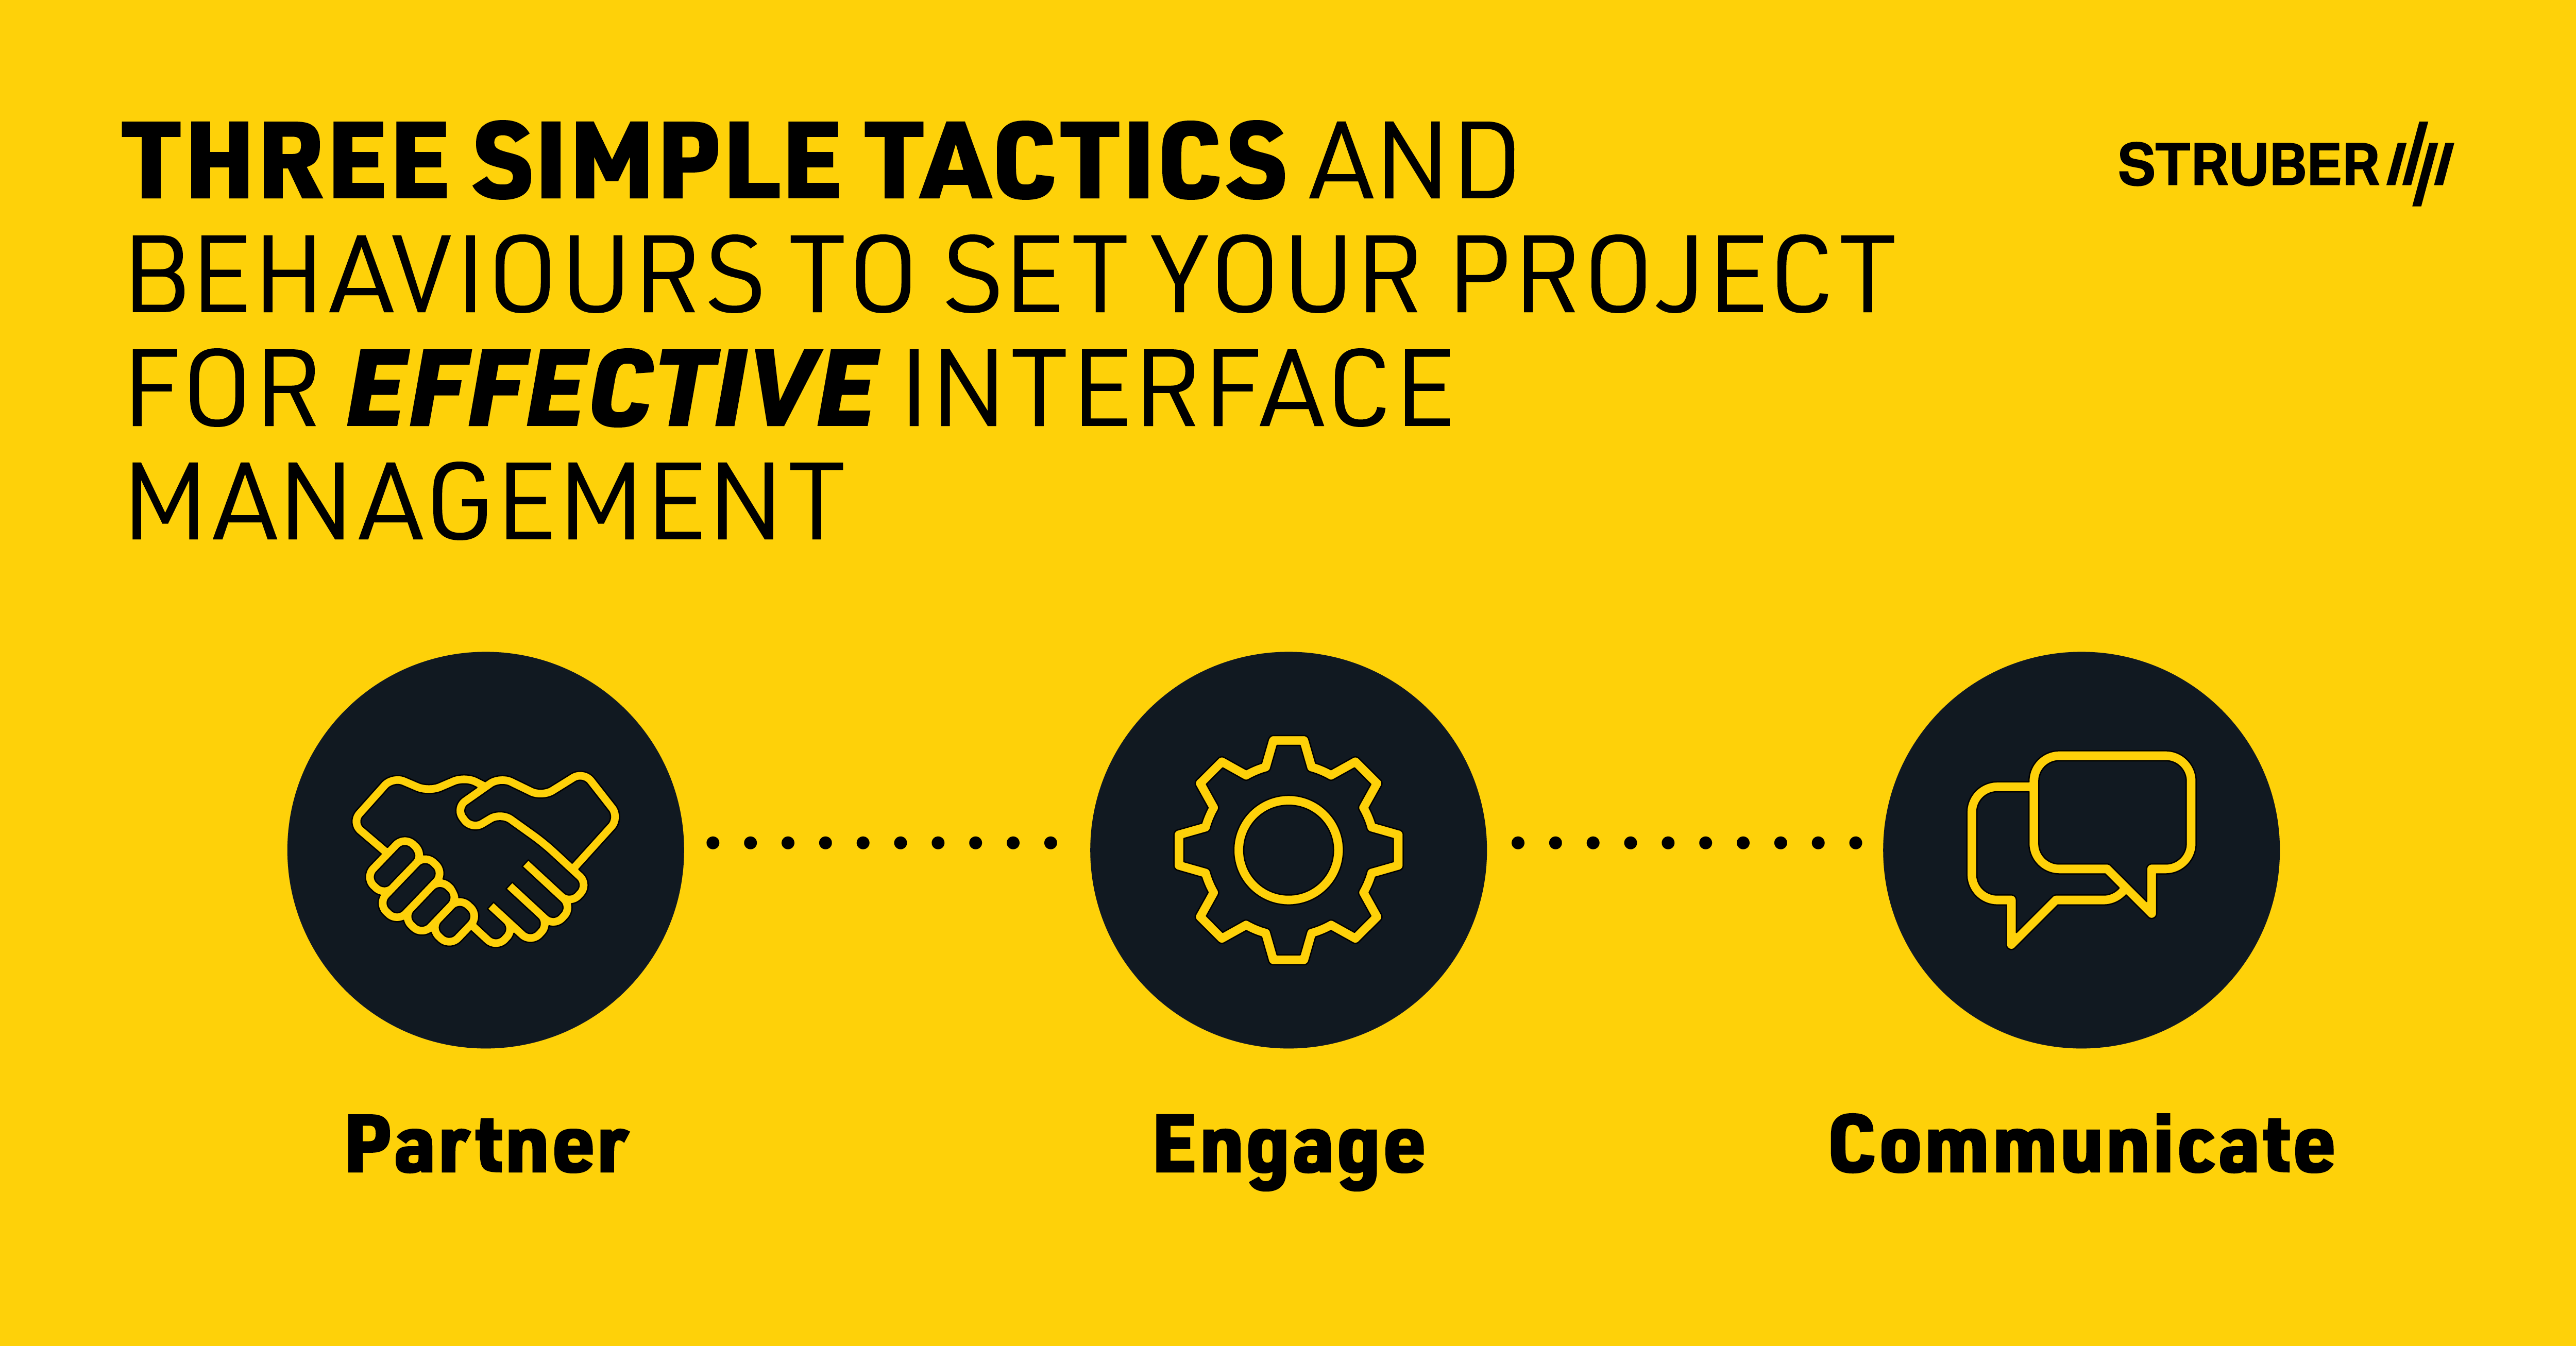 STRUBER Three Simple Tactics and Behaviours that Can Set Your Project to Effective Interface Management